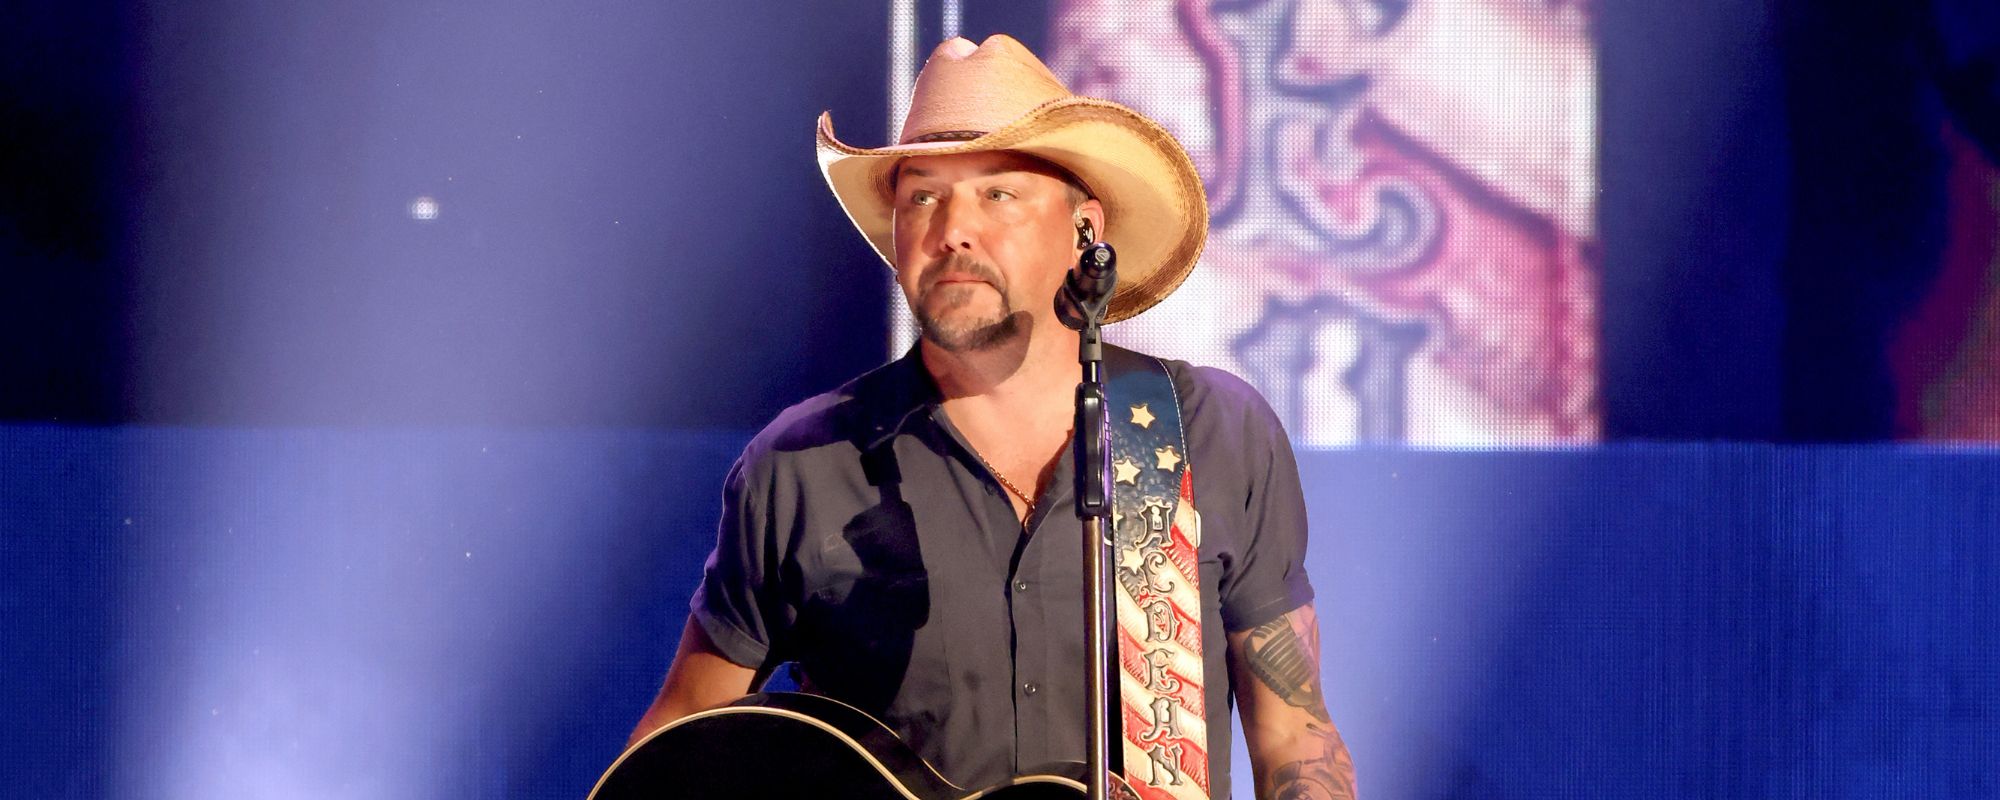 Jason Aldean Pays Tribute To Toby Keith With Heartwarming ACM Performance